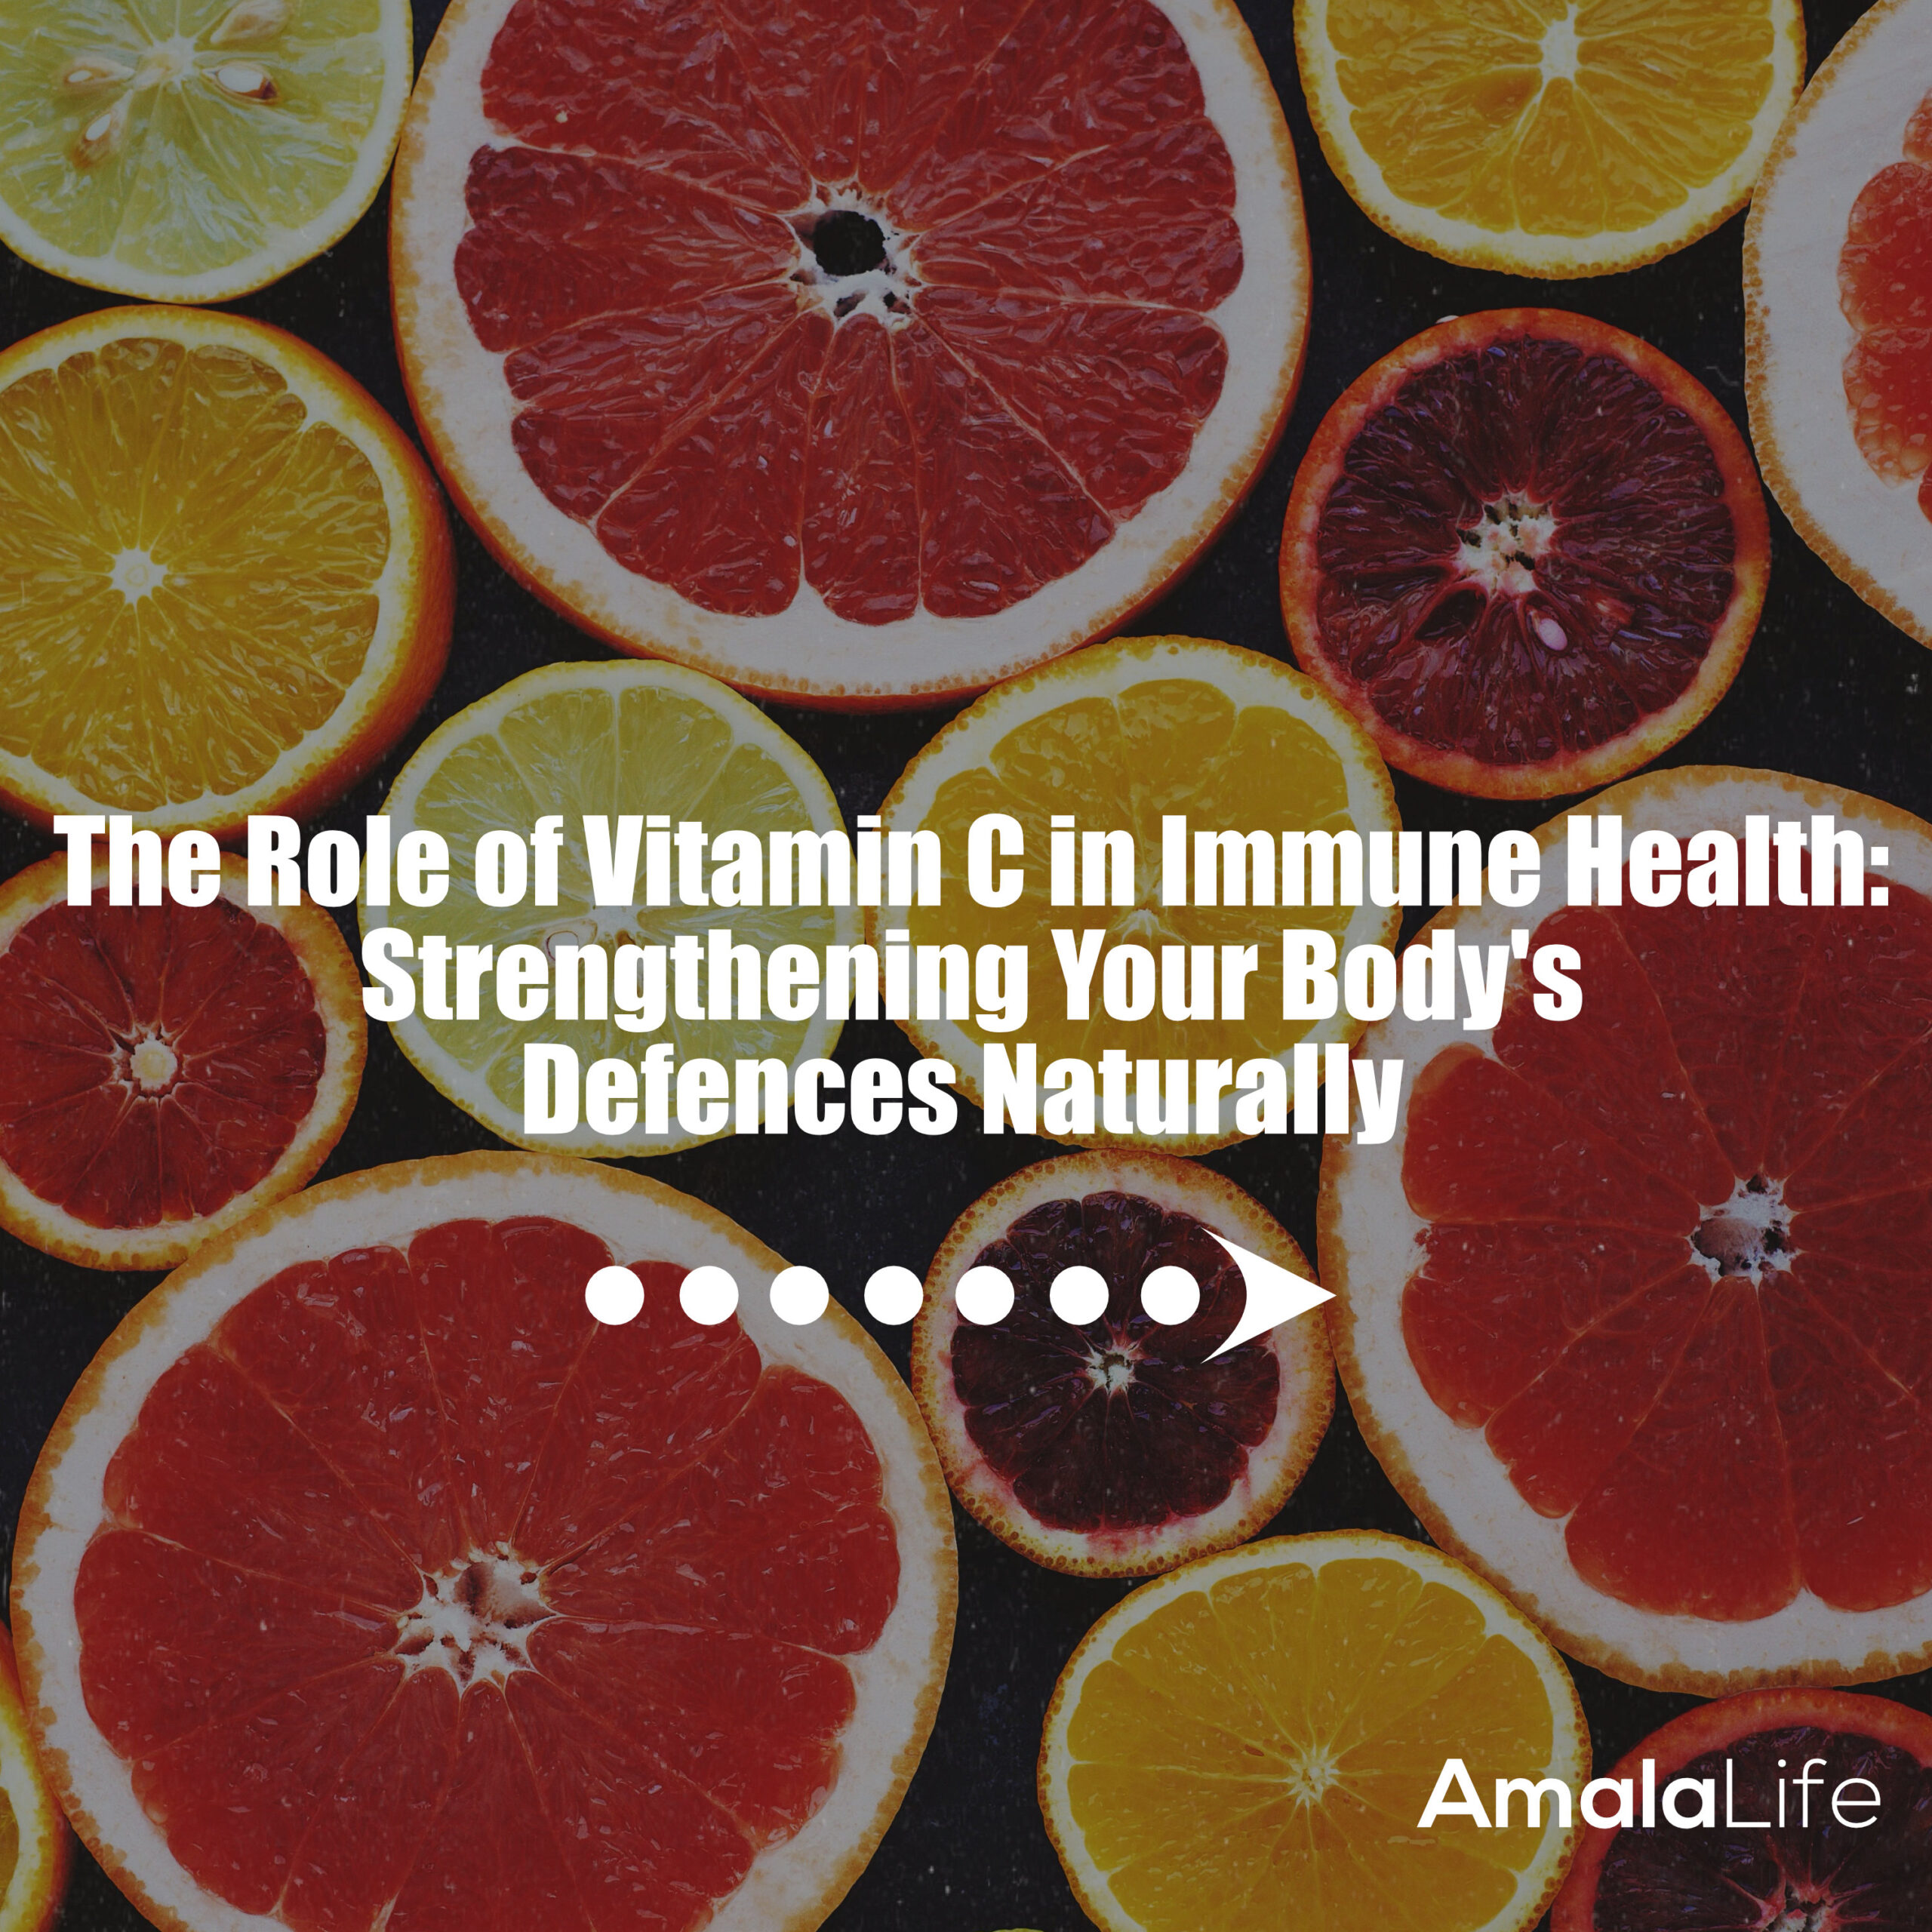 The Role of Vitamin C in Immune Health: Strengthening Your Body’s Defenses Naturally